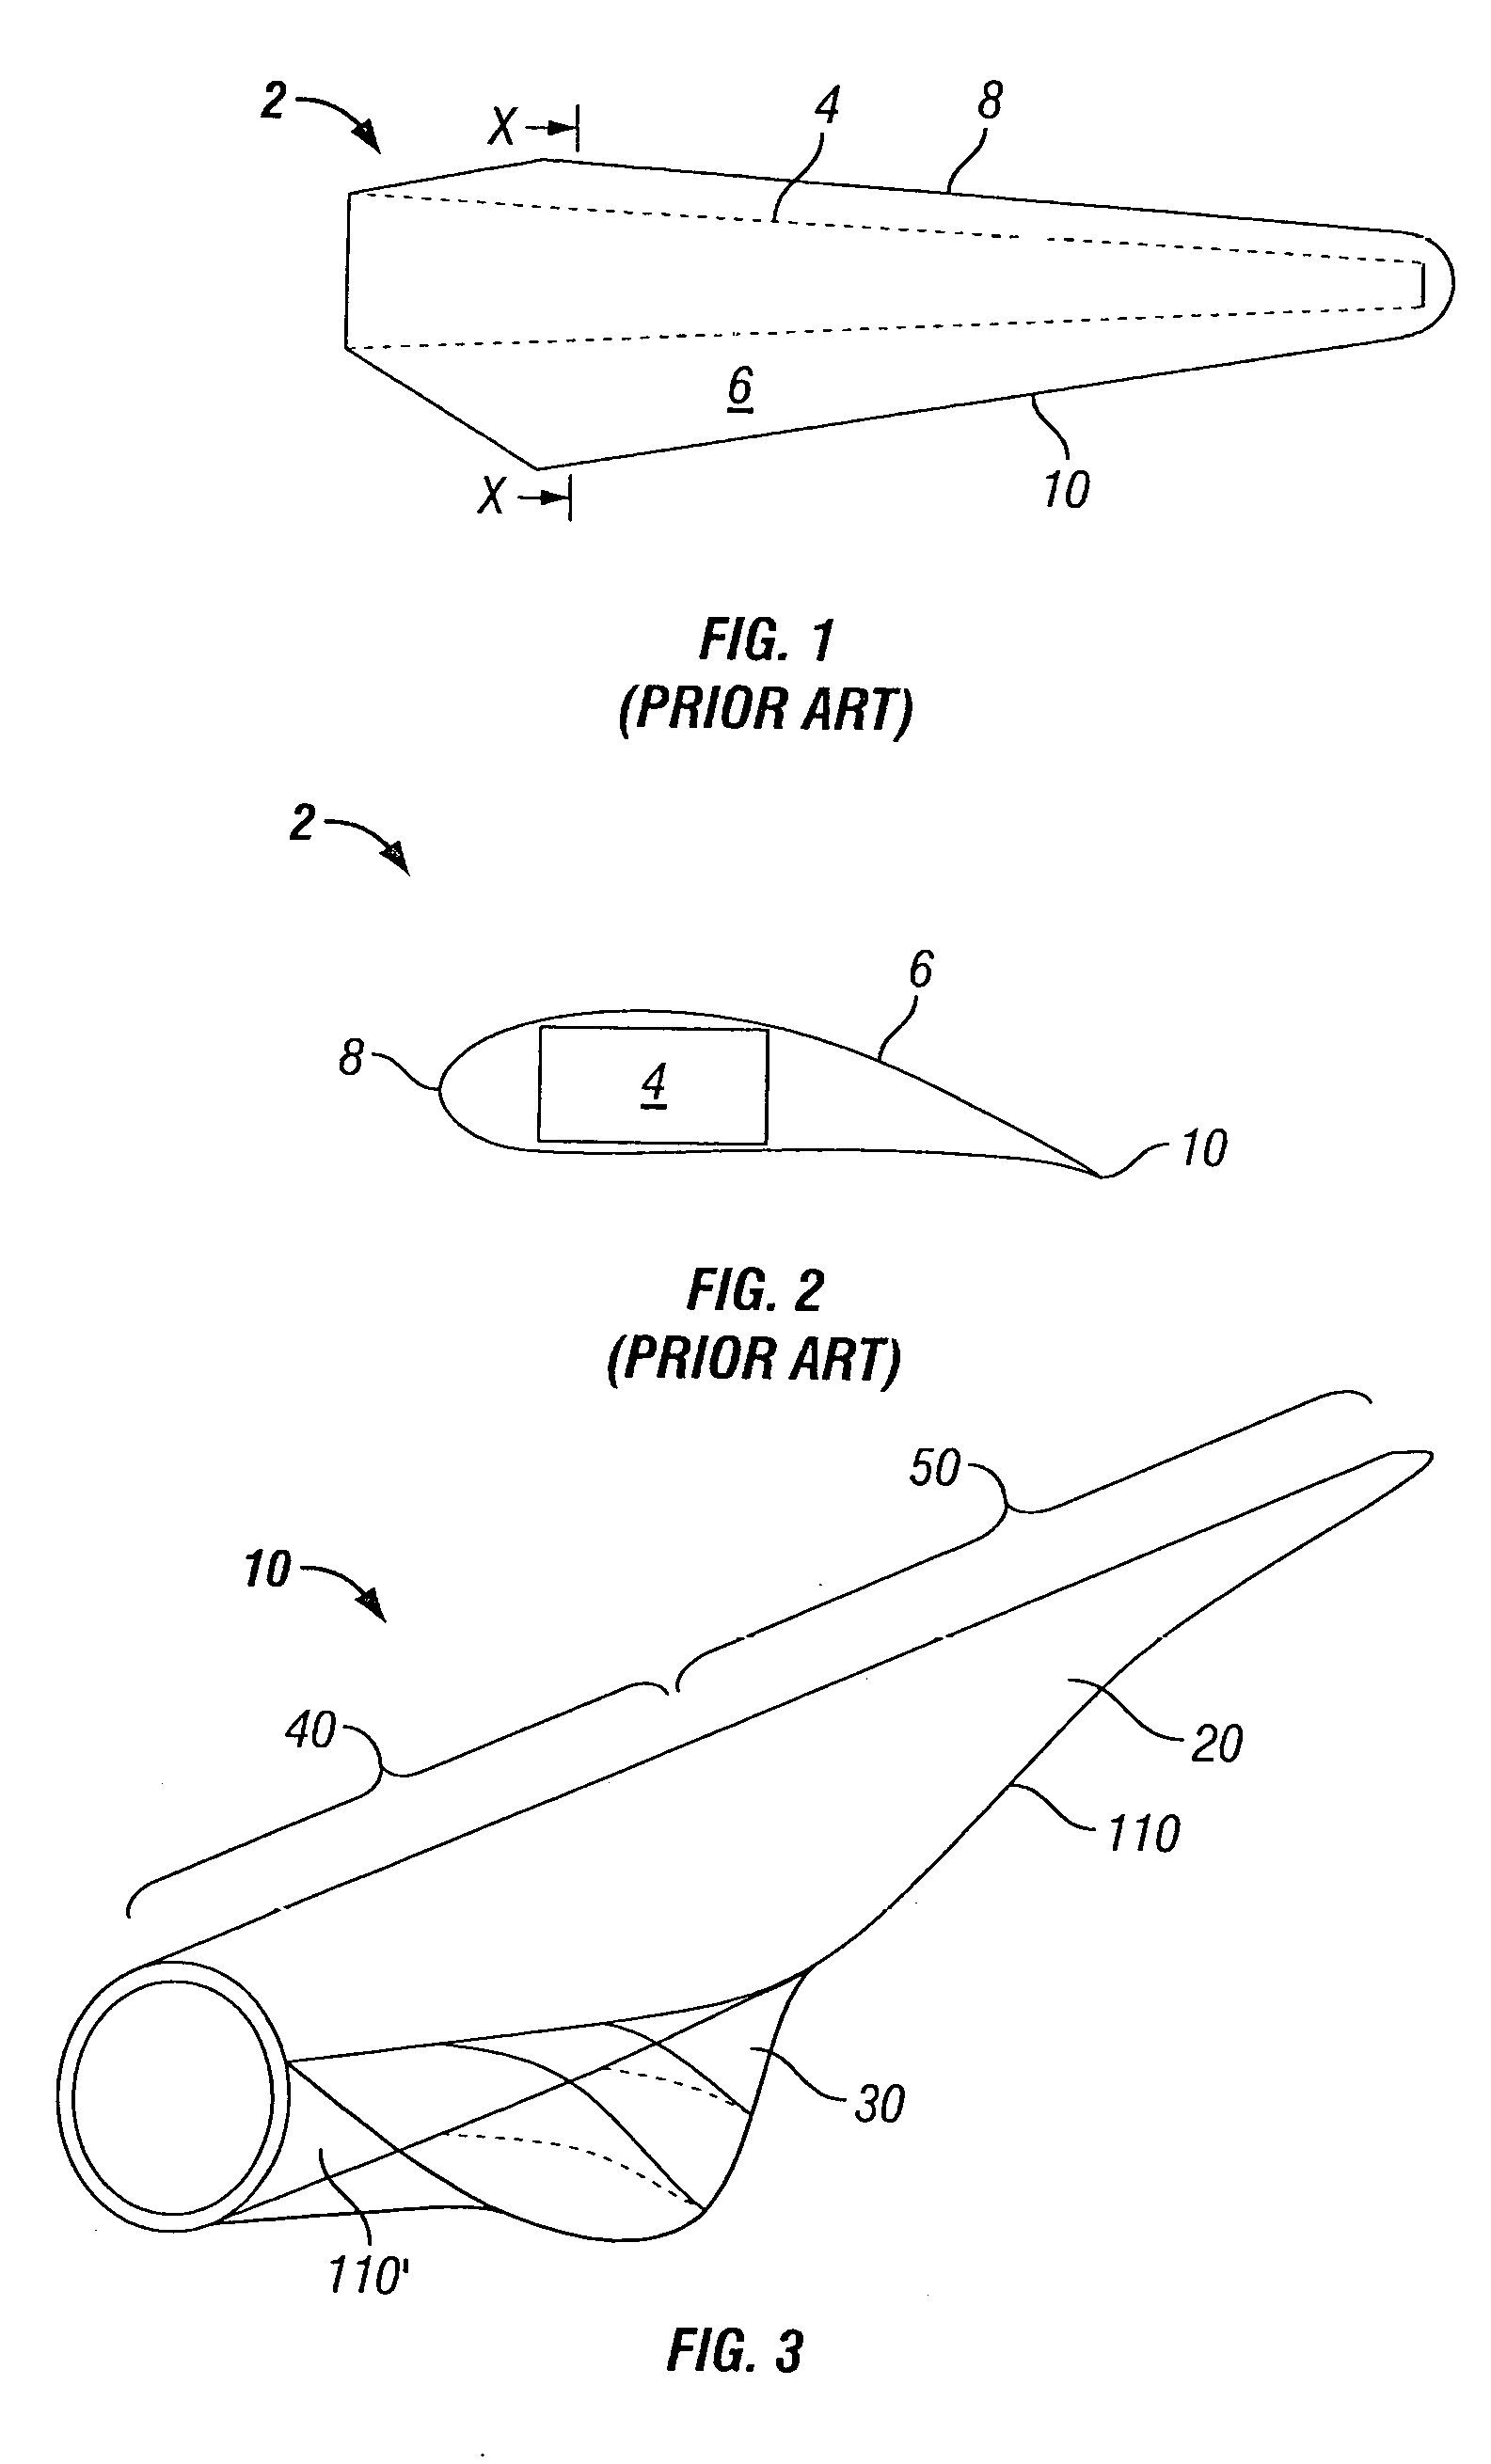 Rotor blade extension portion having a skin located over a framework